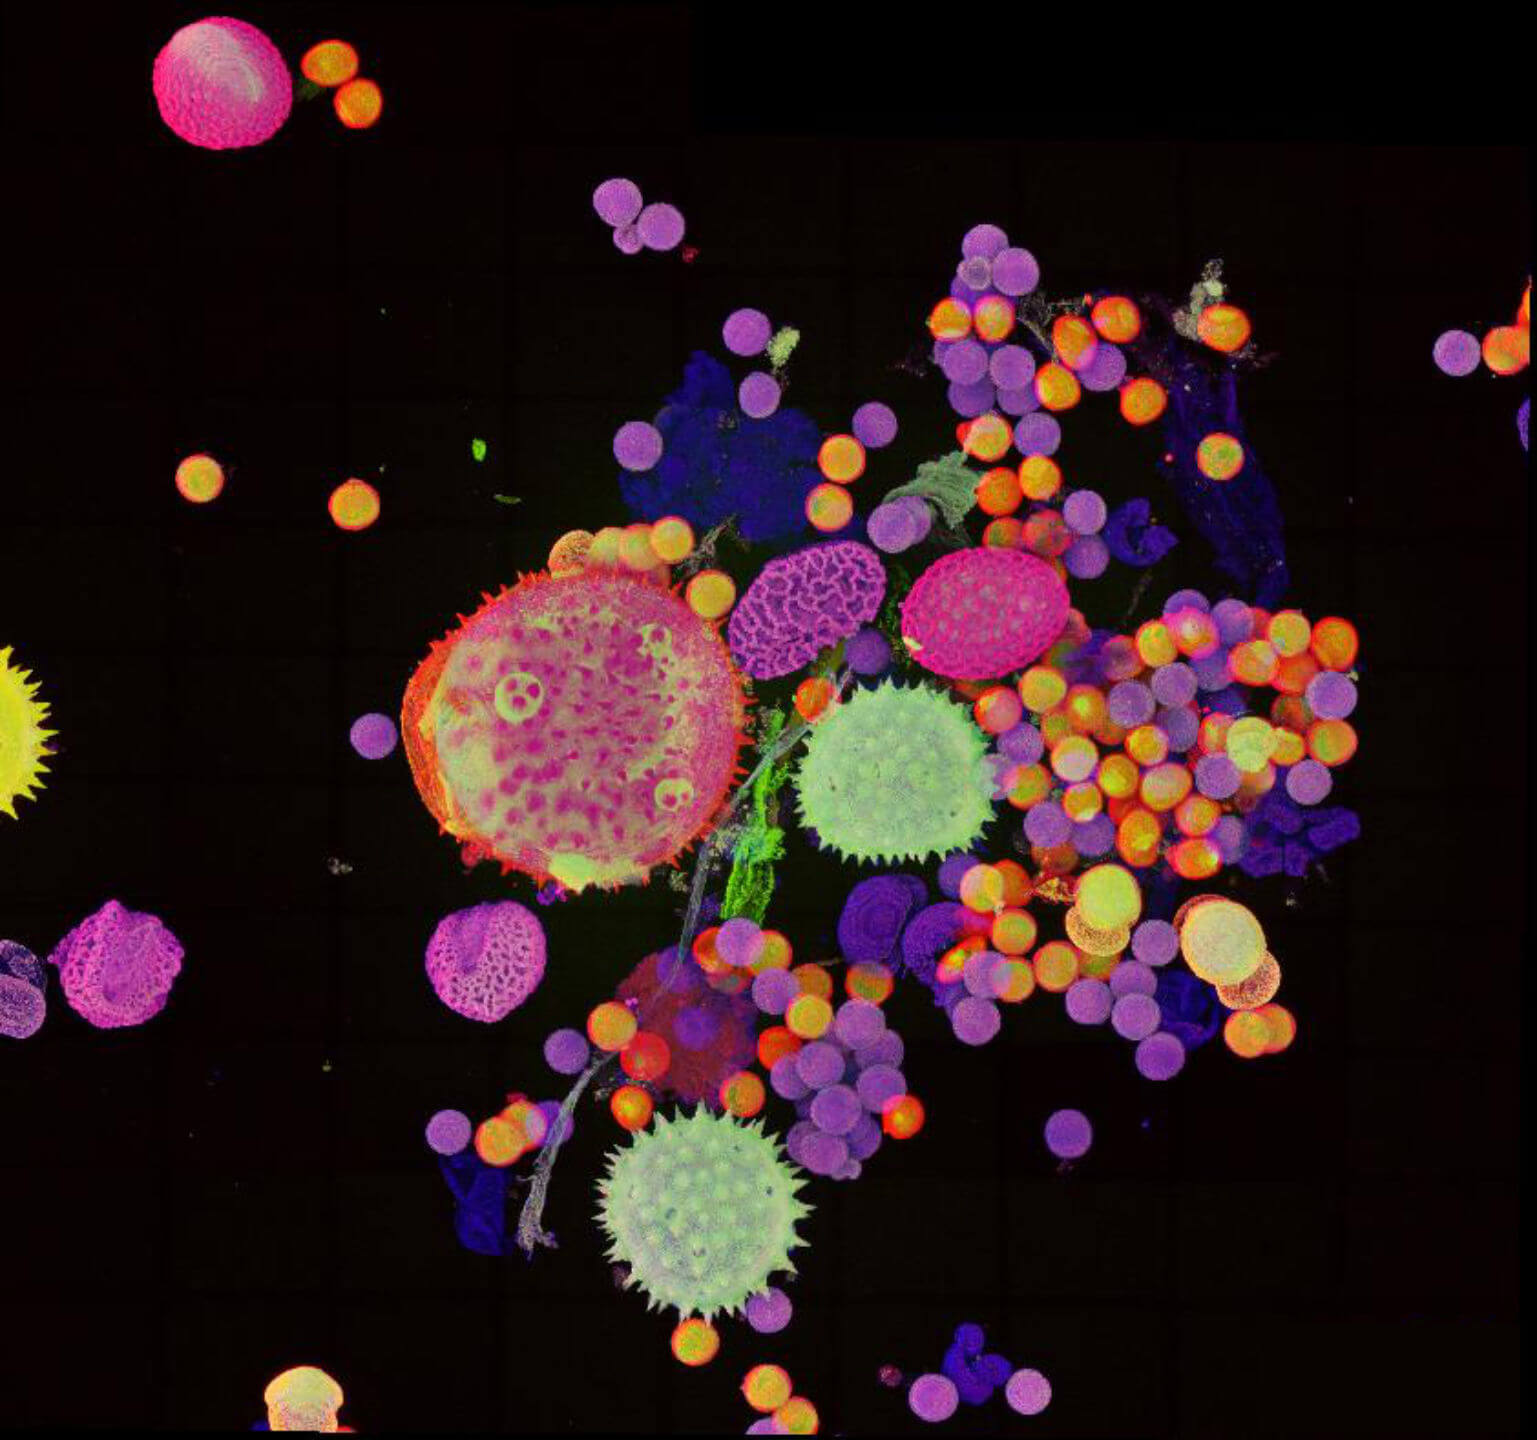 Colorful autofluorescence of pollen grains imaged with STEDYCON